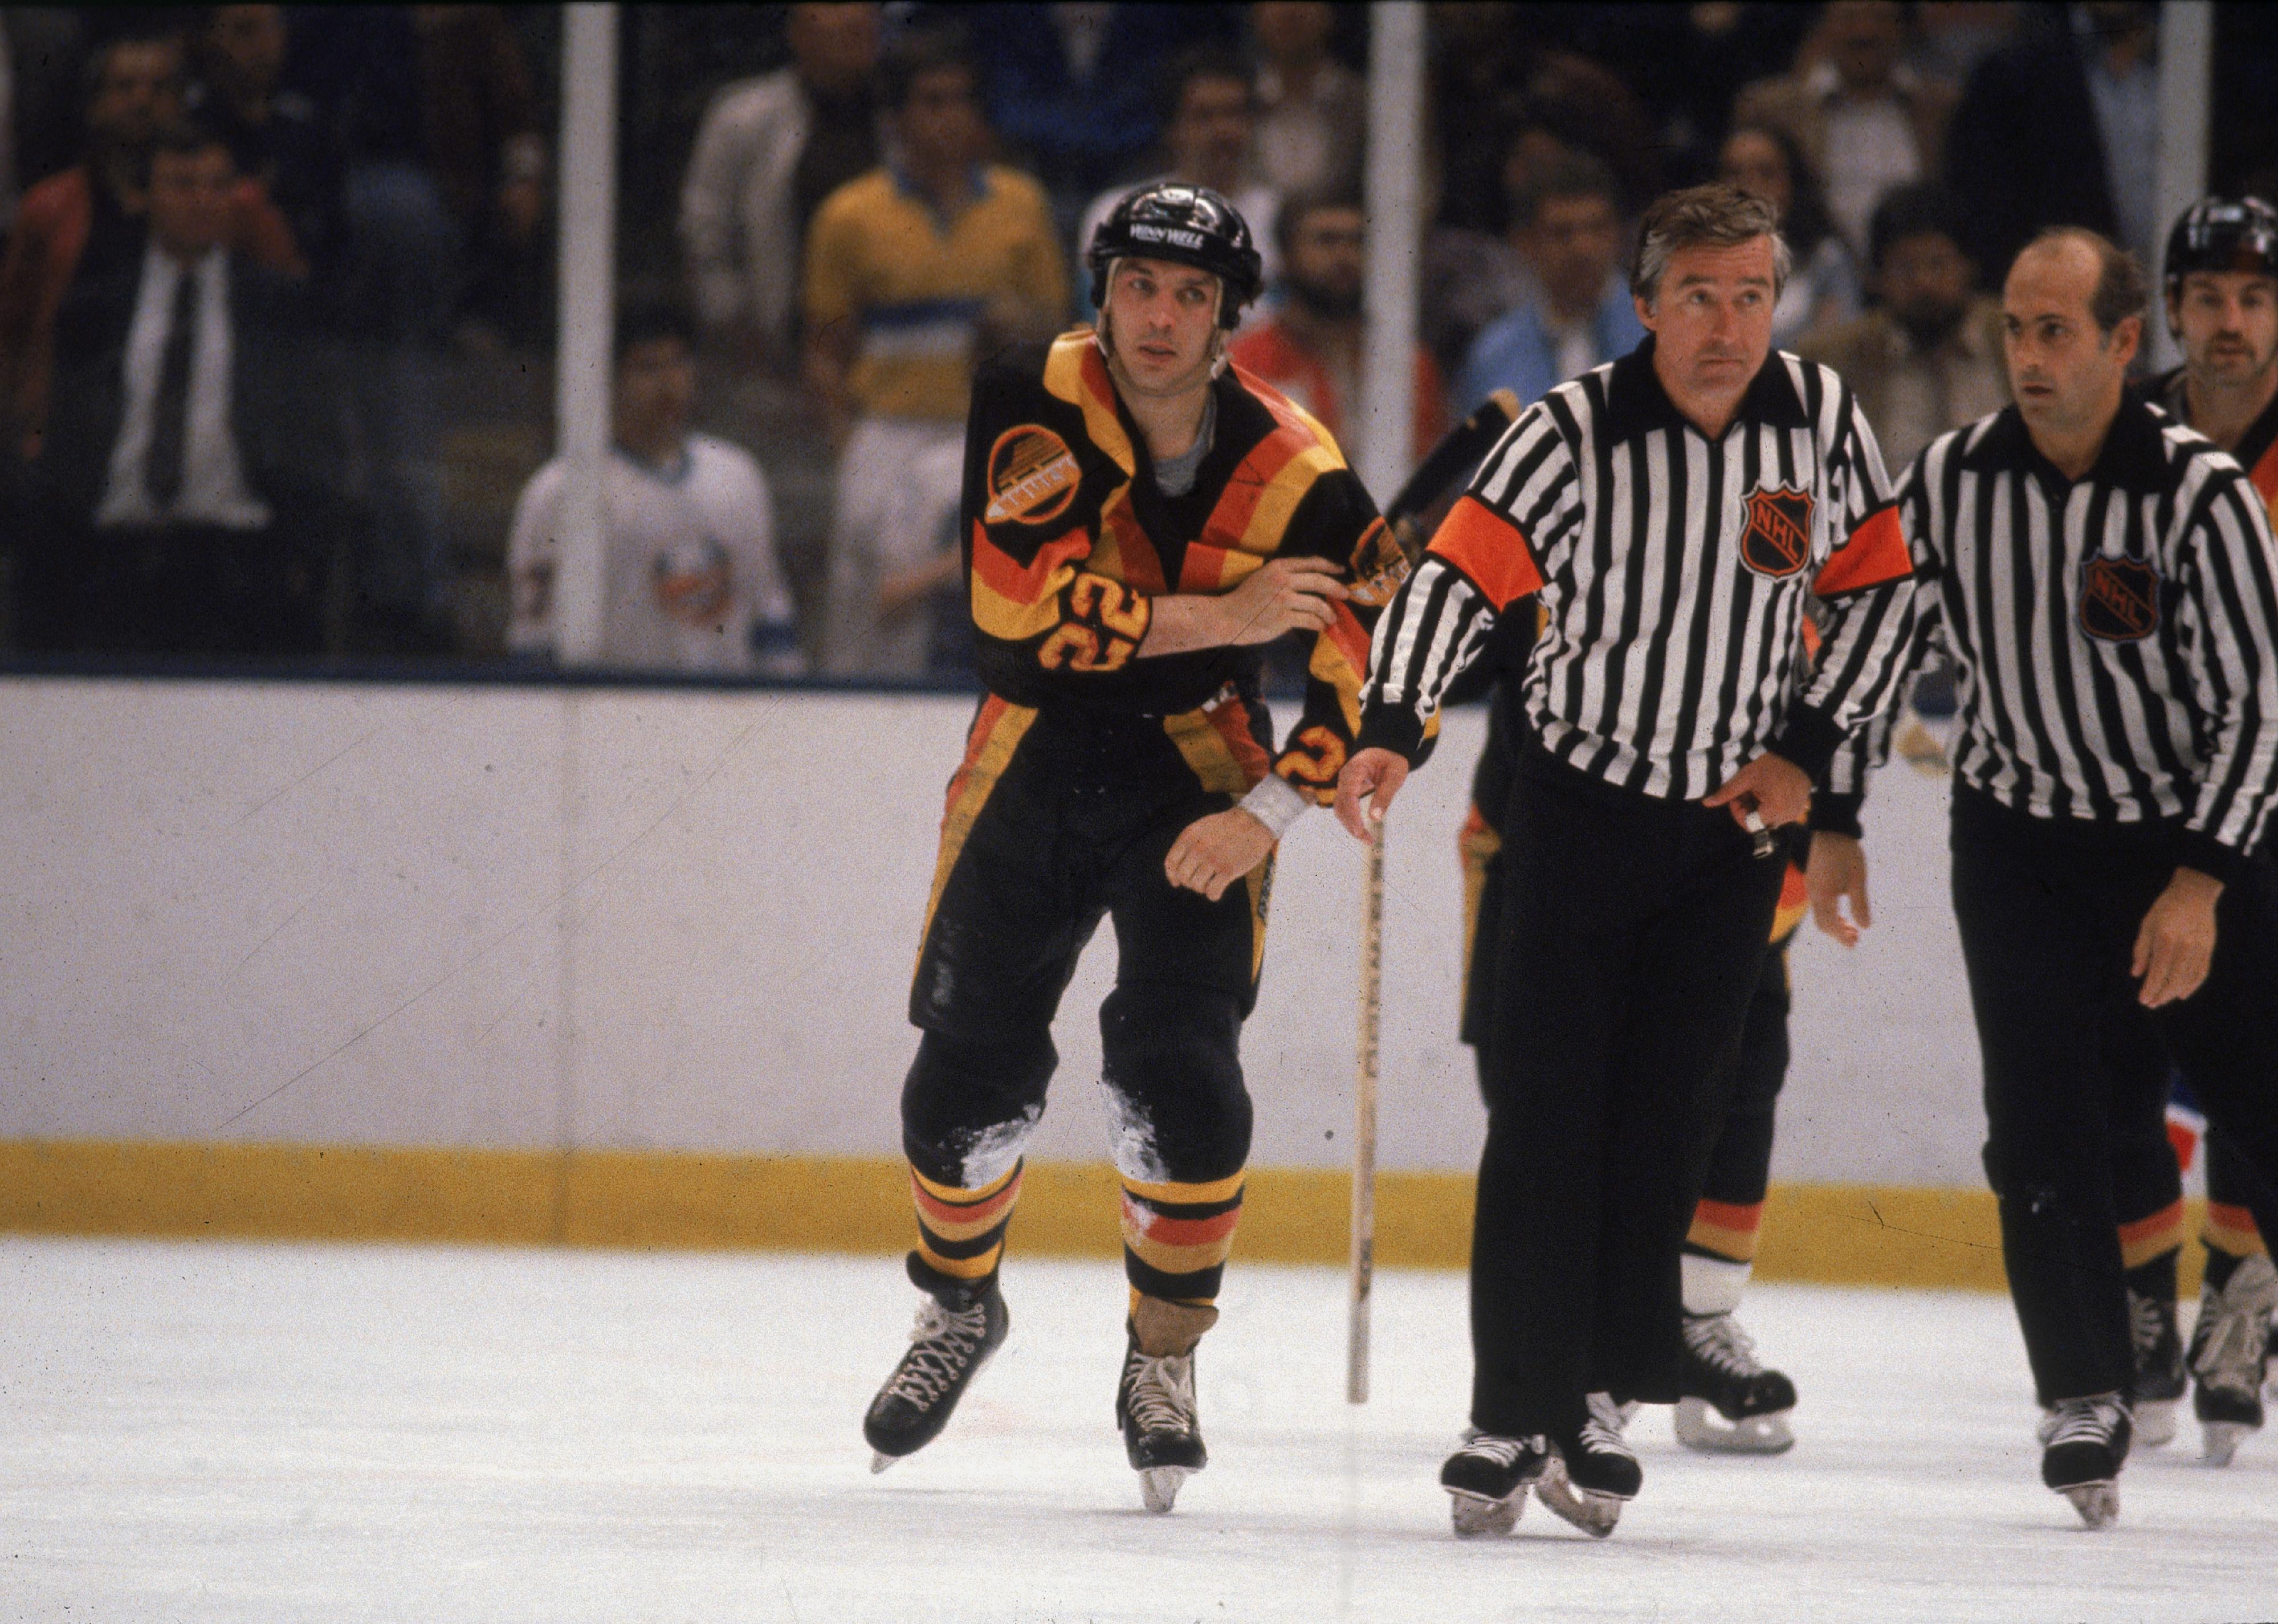 Dave 'Tiger' Williams is escorted of the ice by two officials.